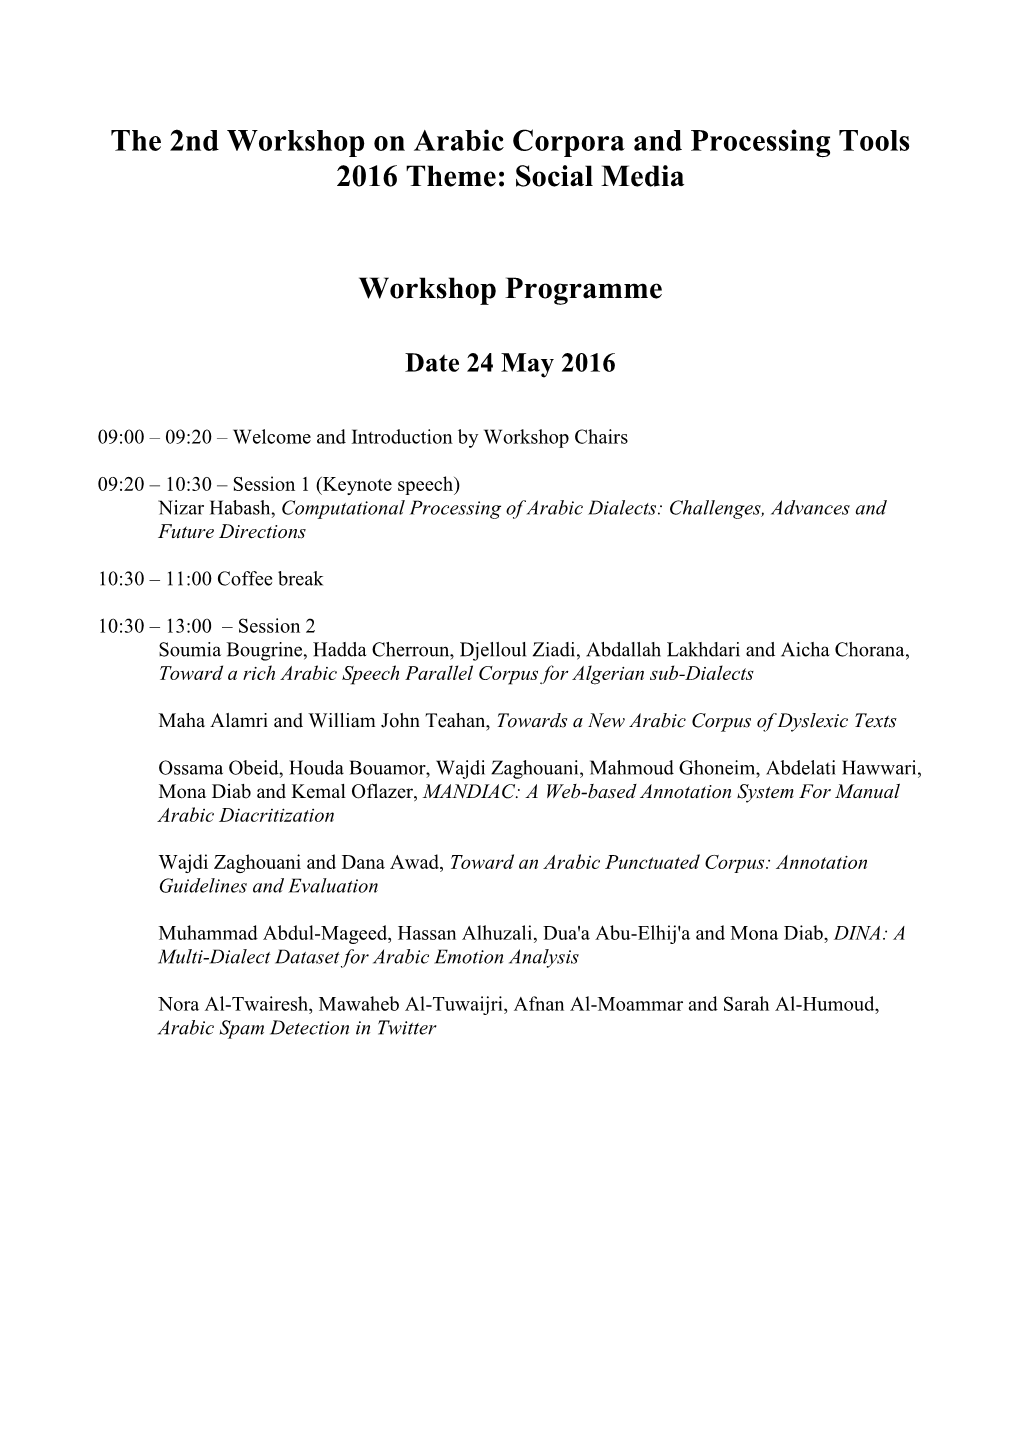 The 2Nd Workshop on Arabic Corpora and Processing Tools 2016 Theme: Social Media Workshop Programme